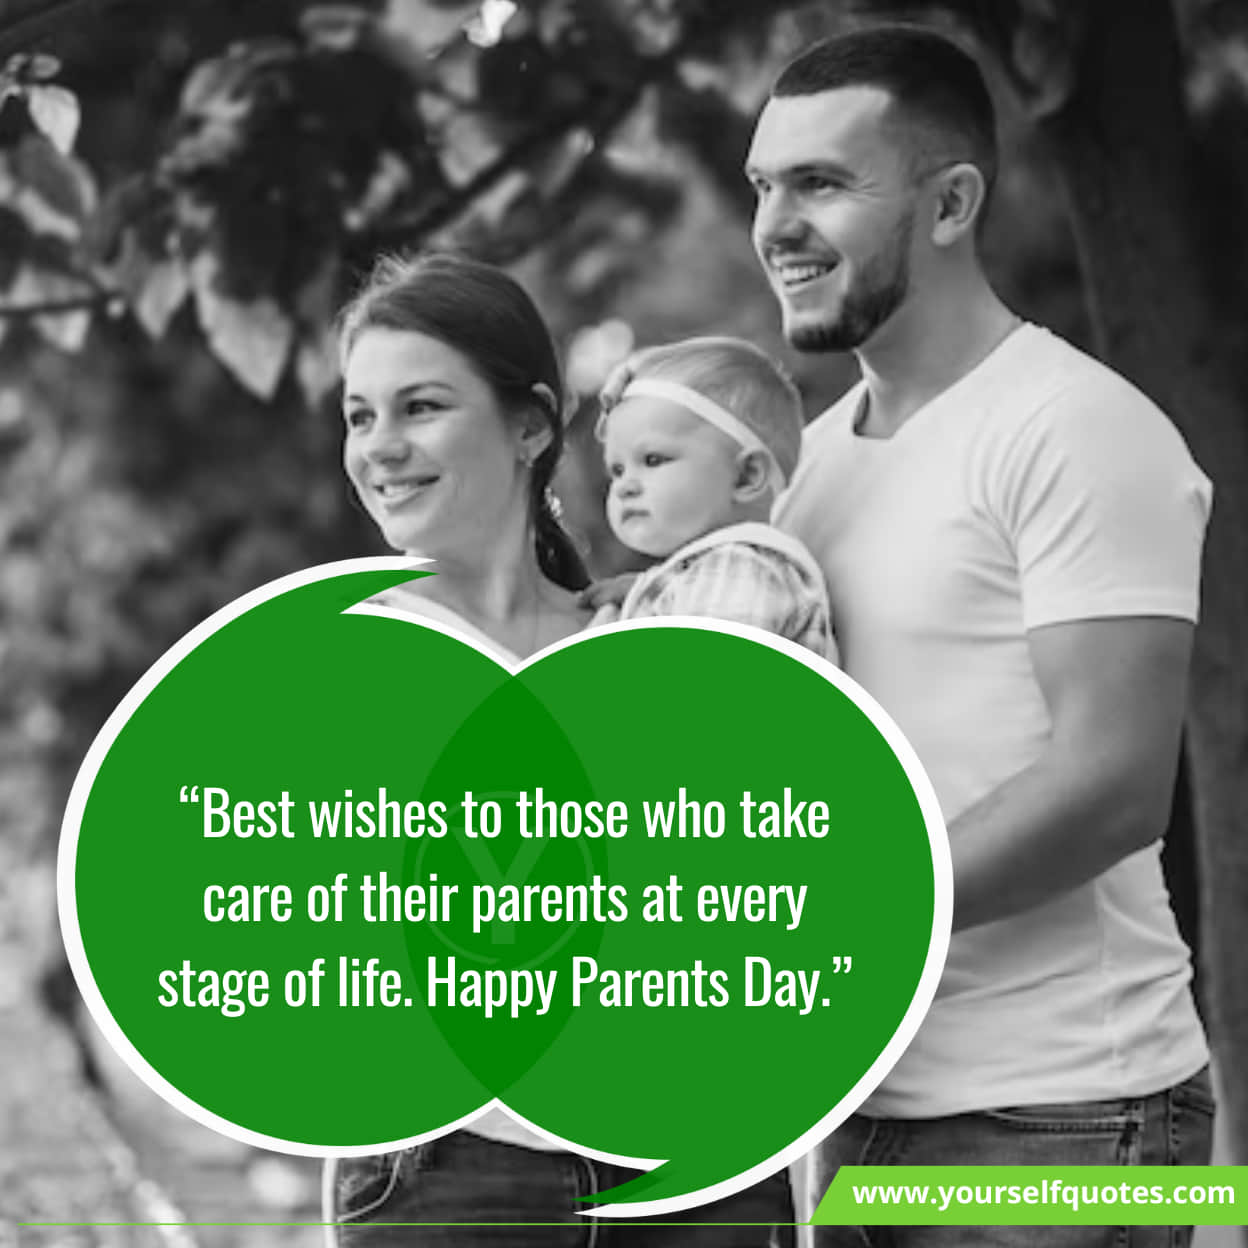 Celebrating the guidance and support of parents